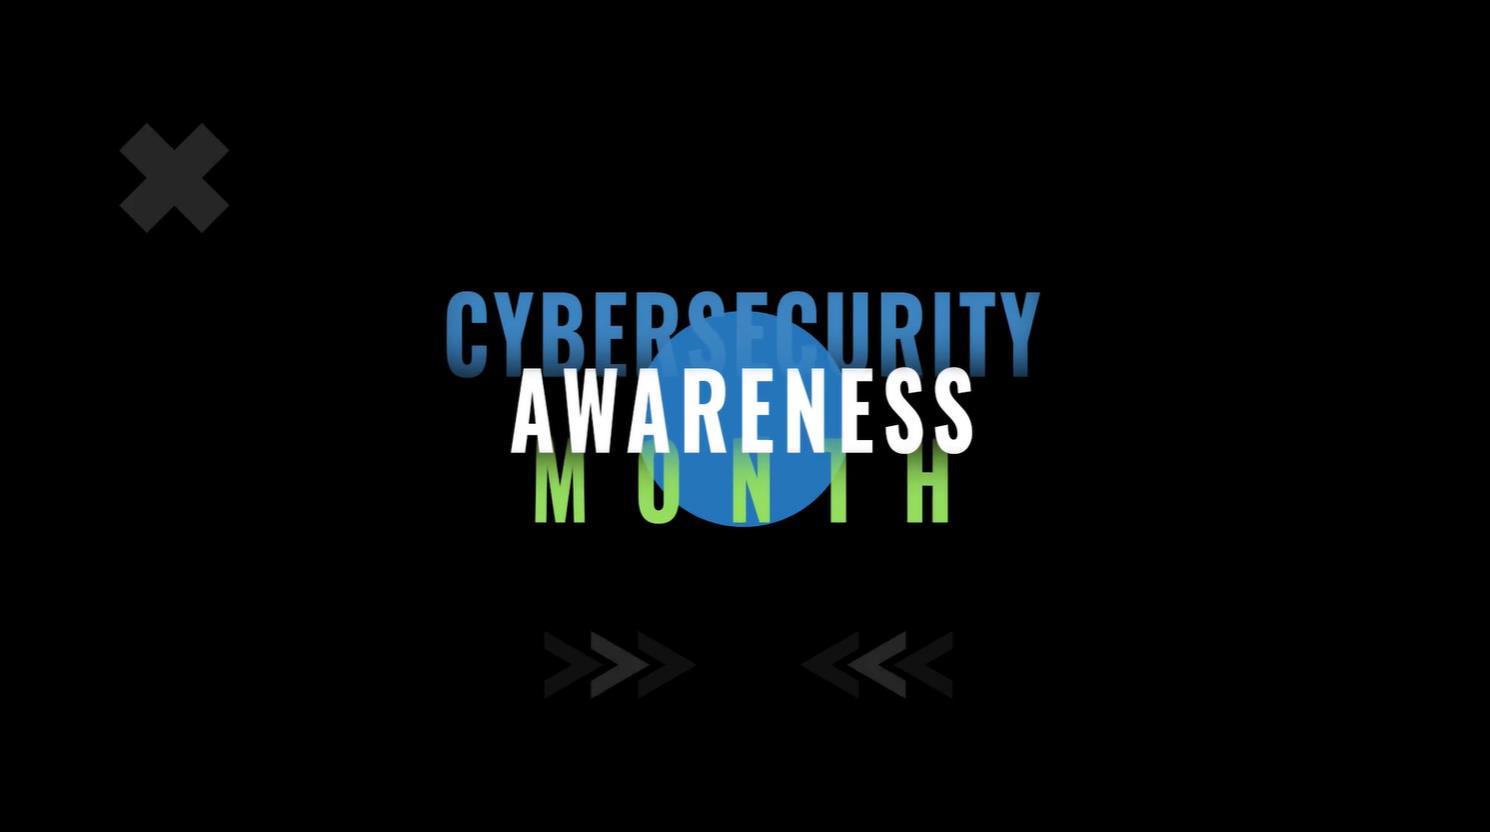 Cybersecurity Awareness Month Video Cover Photo (Oct 28th)